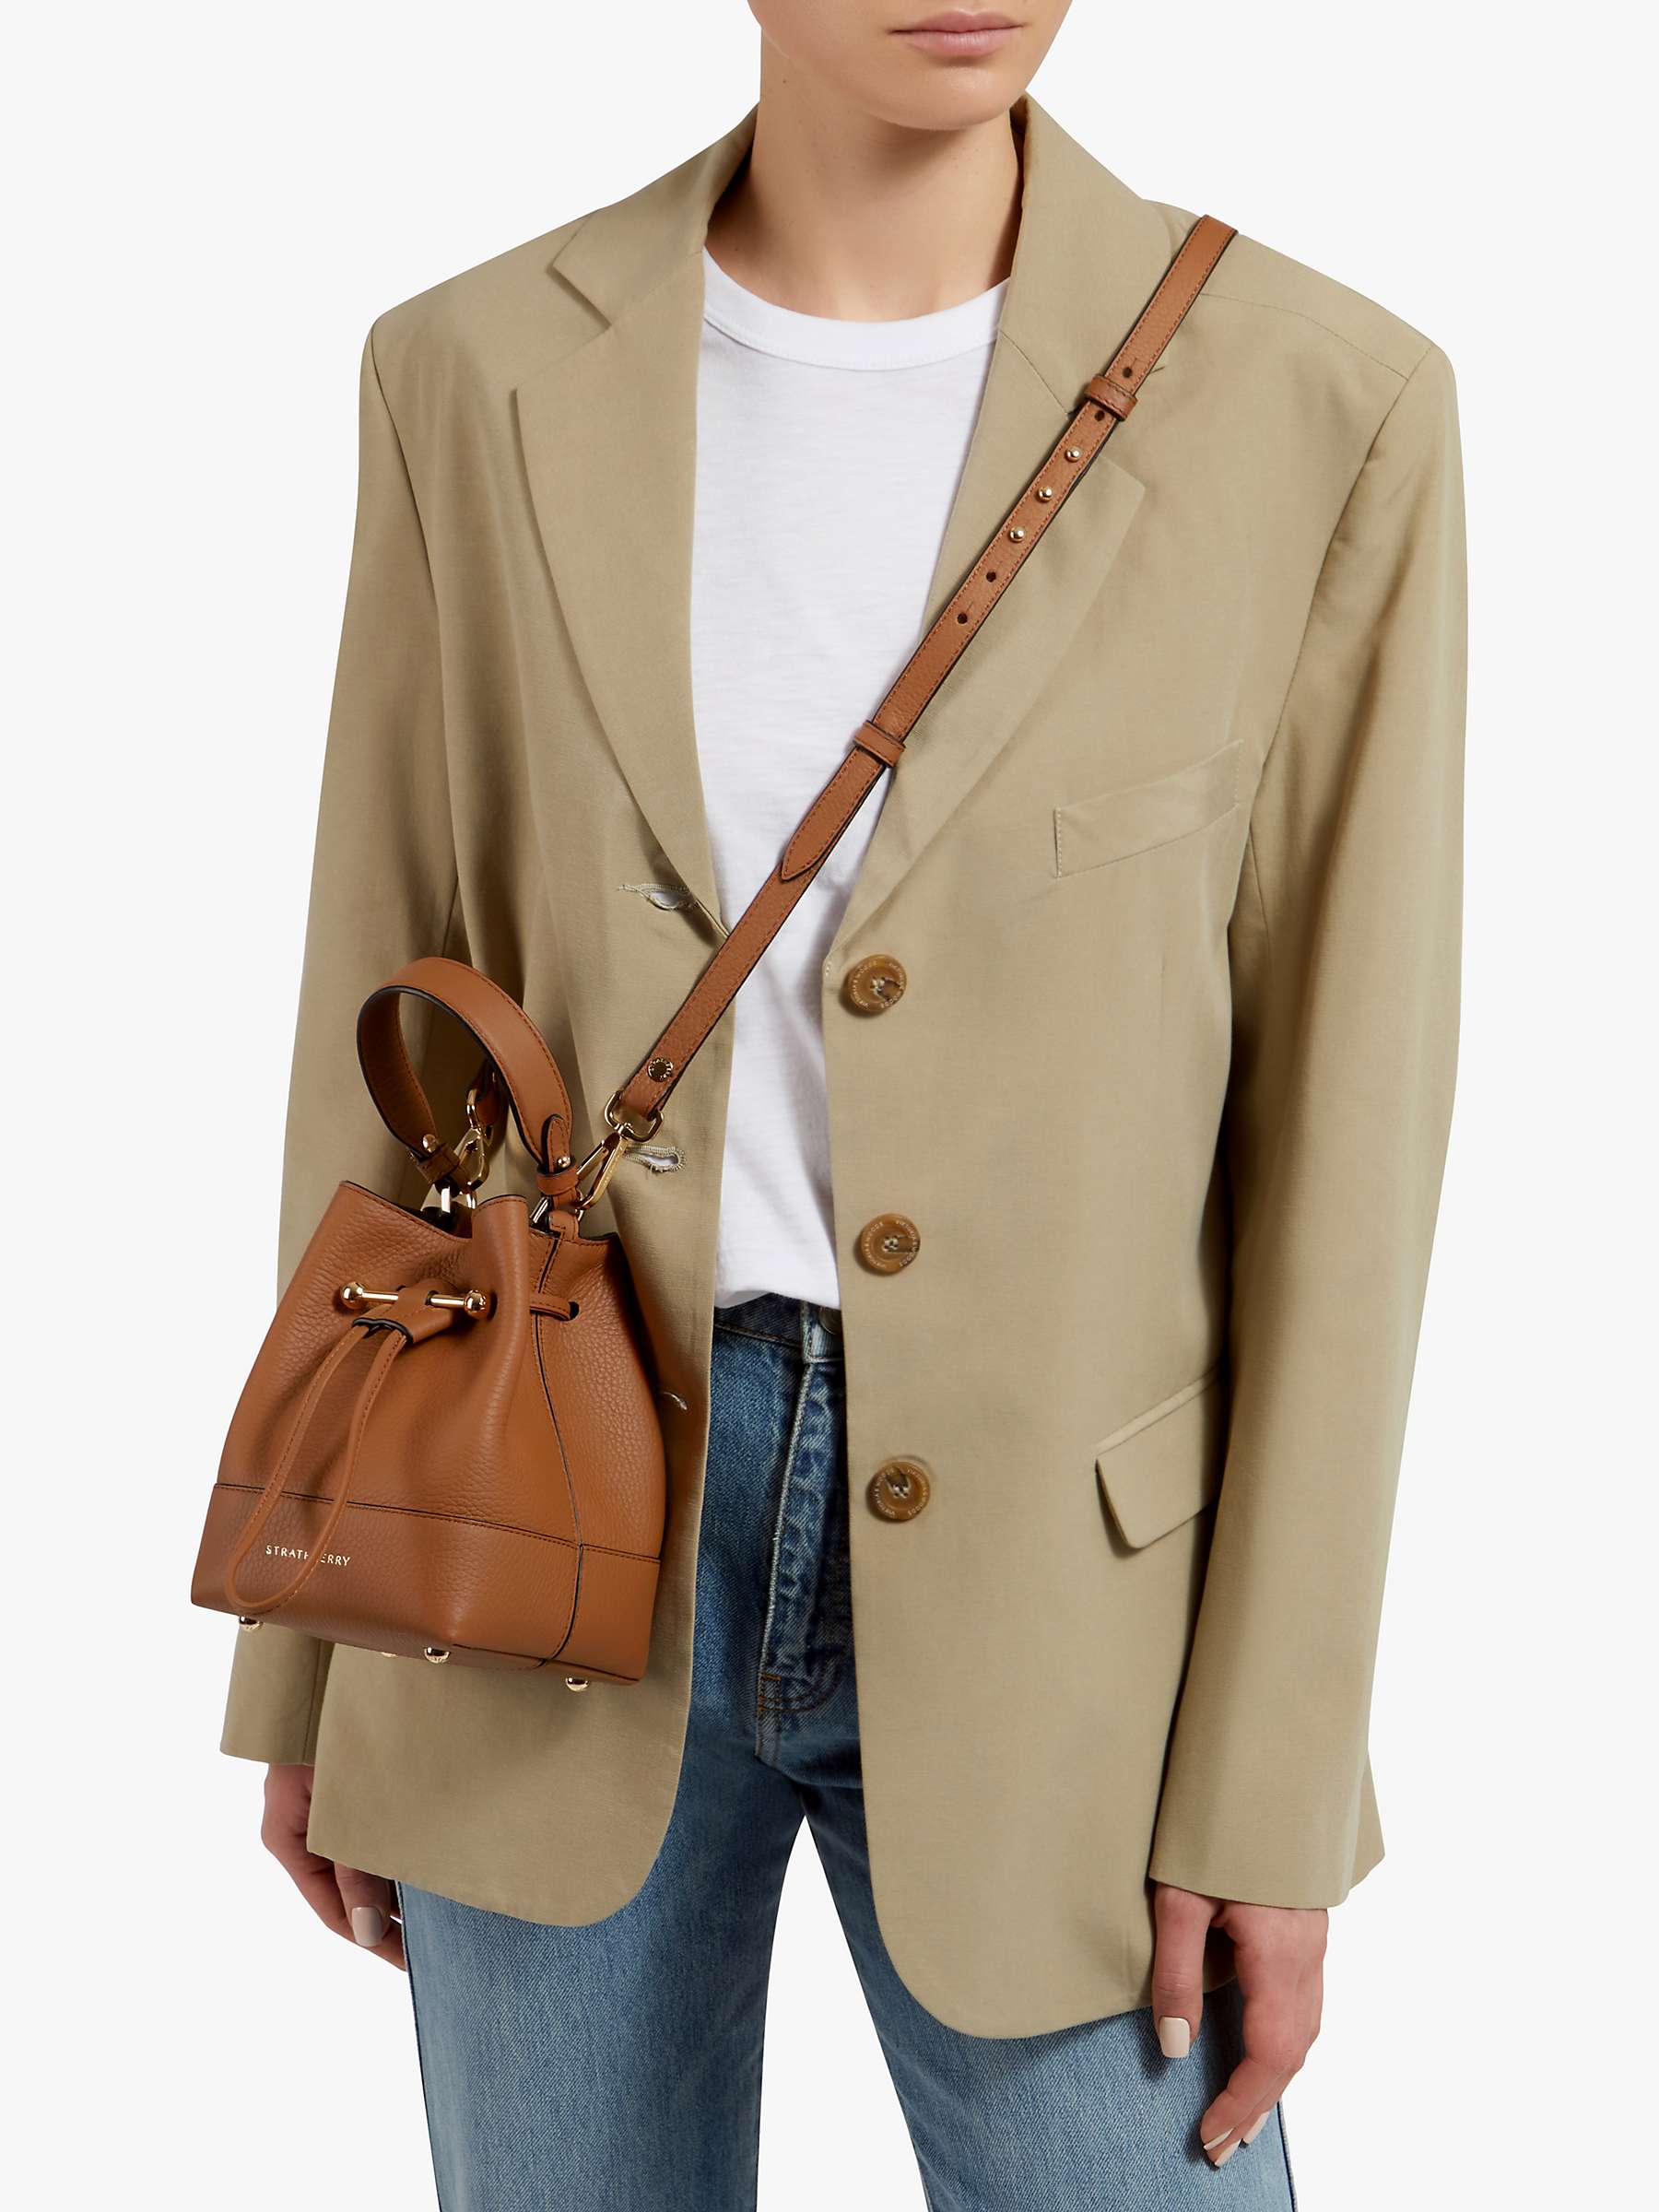 Buy Strathberry Lana Osette Leather Bucket Bag Online at johnlewis.com